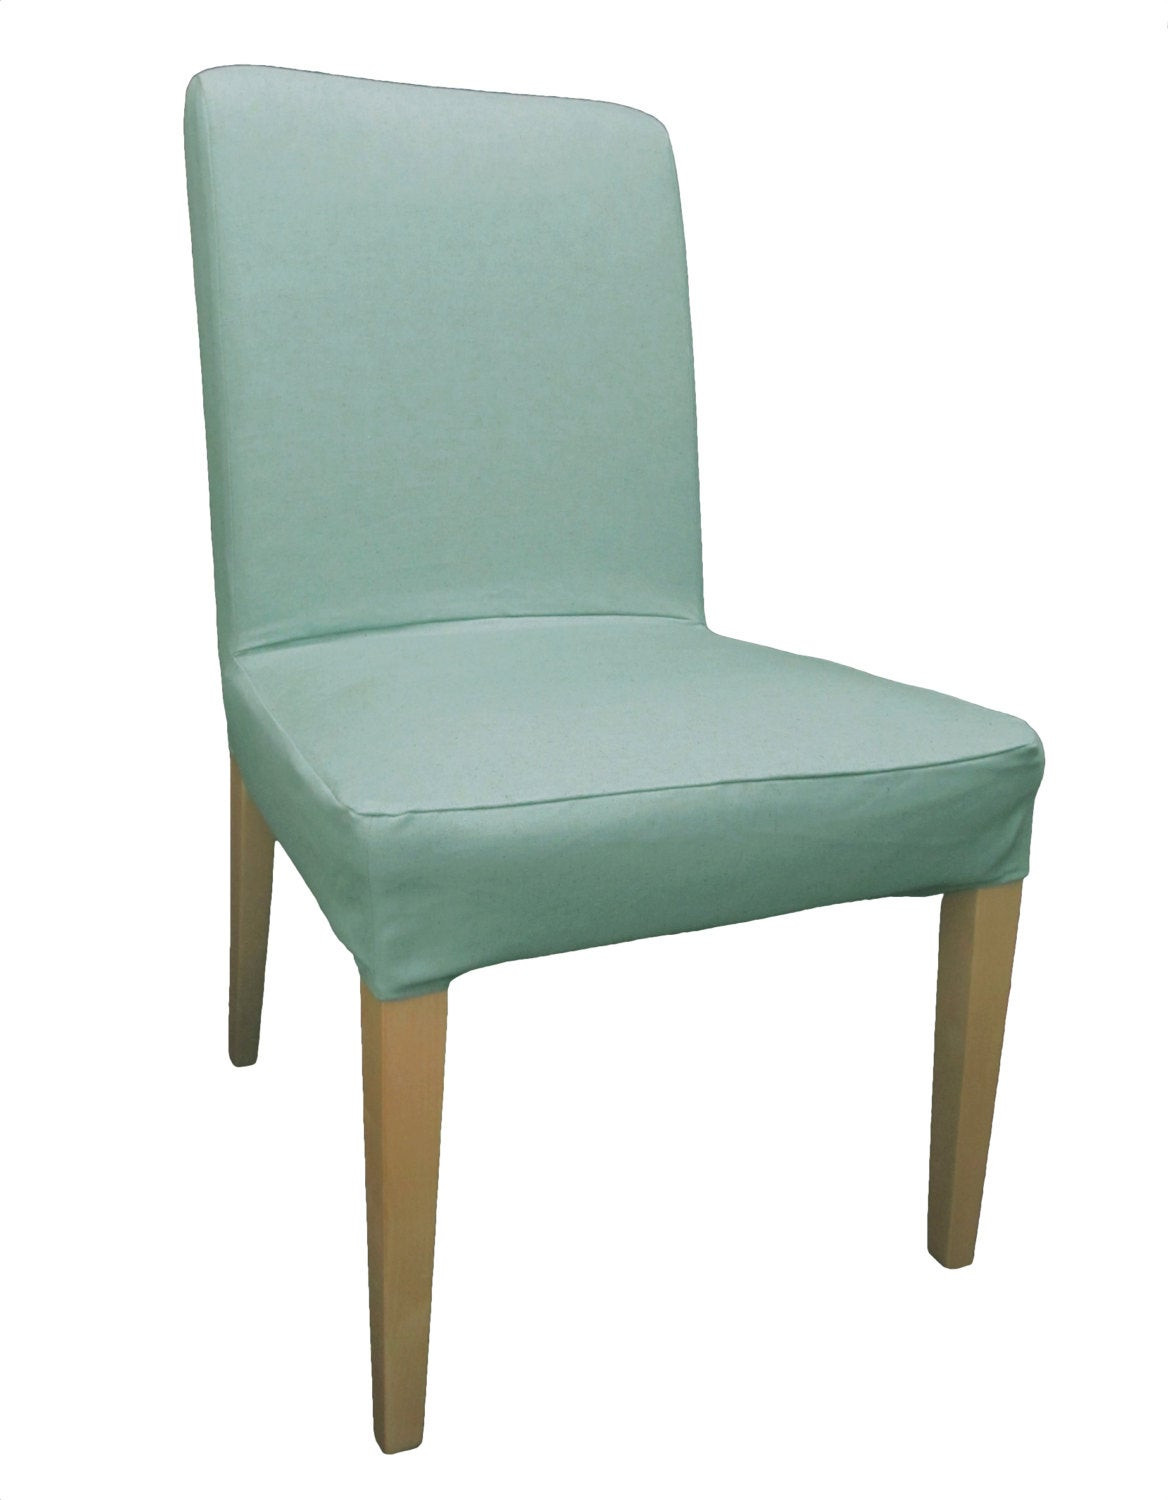 Best ideas about Ikea Dining Chair
. Save or Pin Slipcover for Older IKEA Henriksdal Dining Chair by Now.